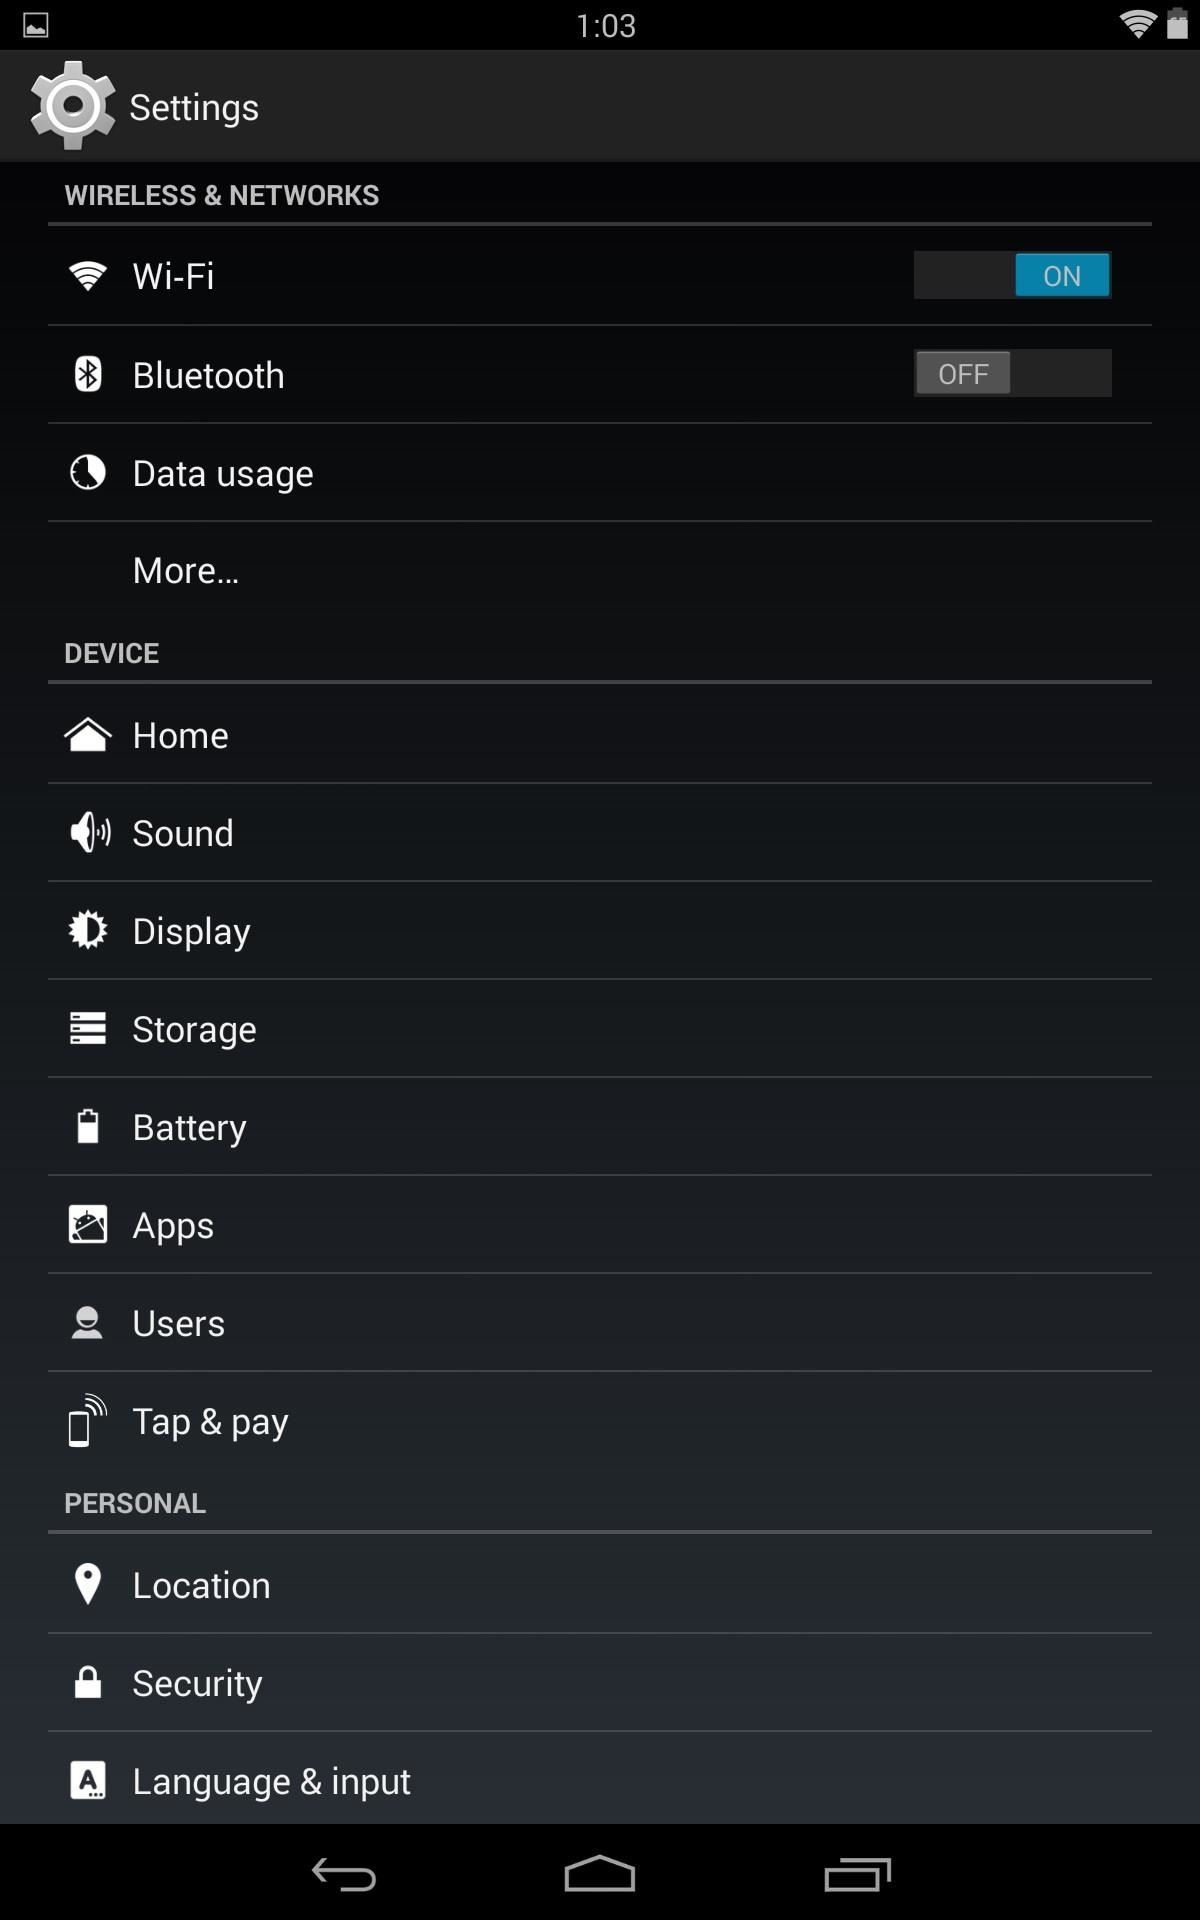 How to Separate the Settings Menu on Your Nexus 7 Tablet into Tabs Arranged by Category